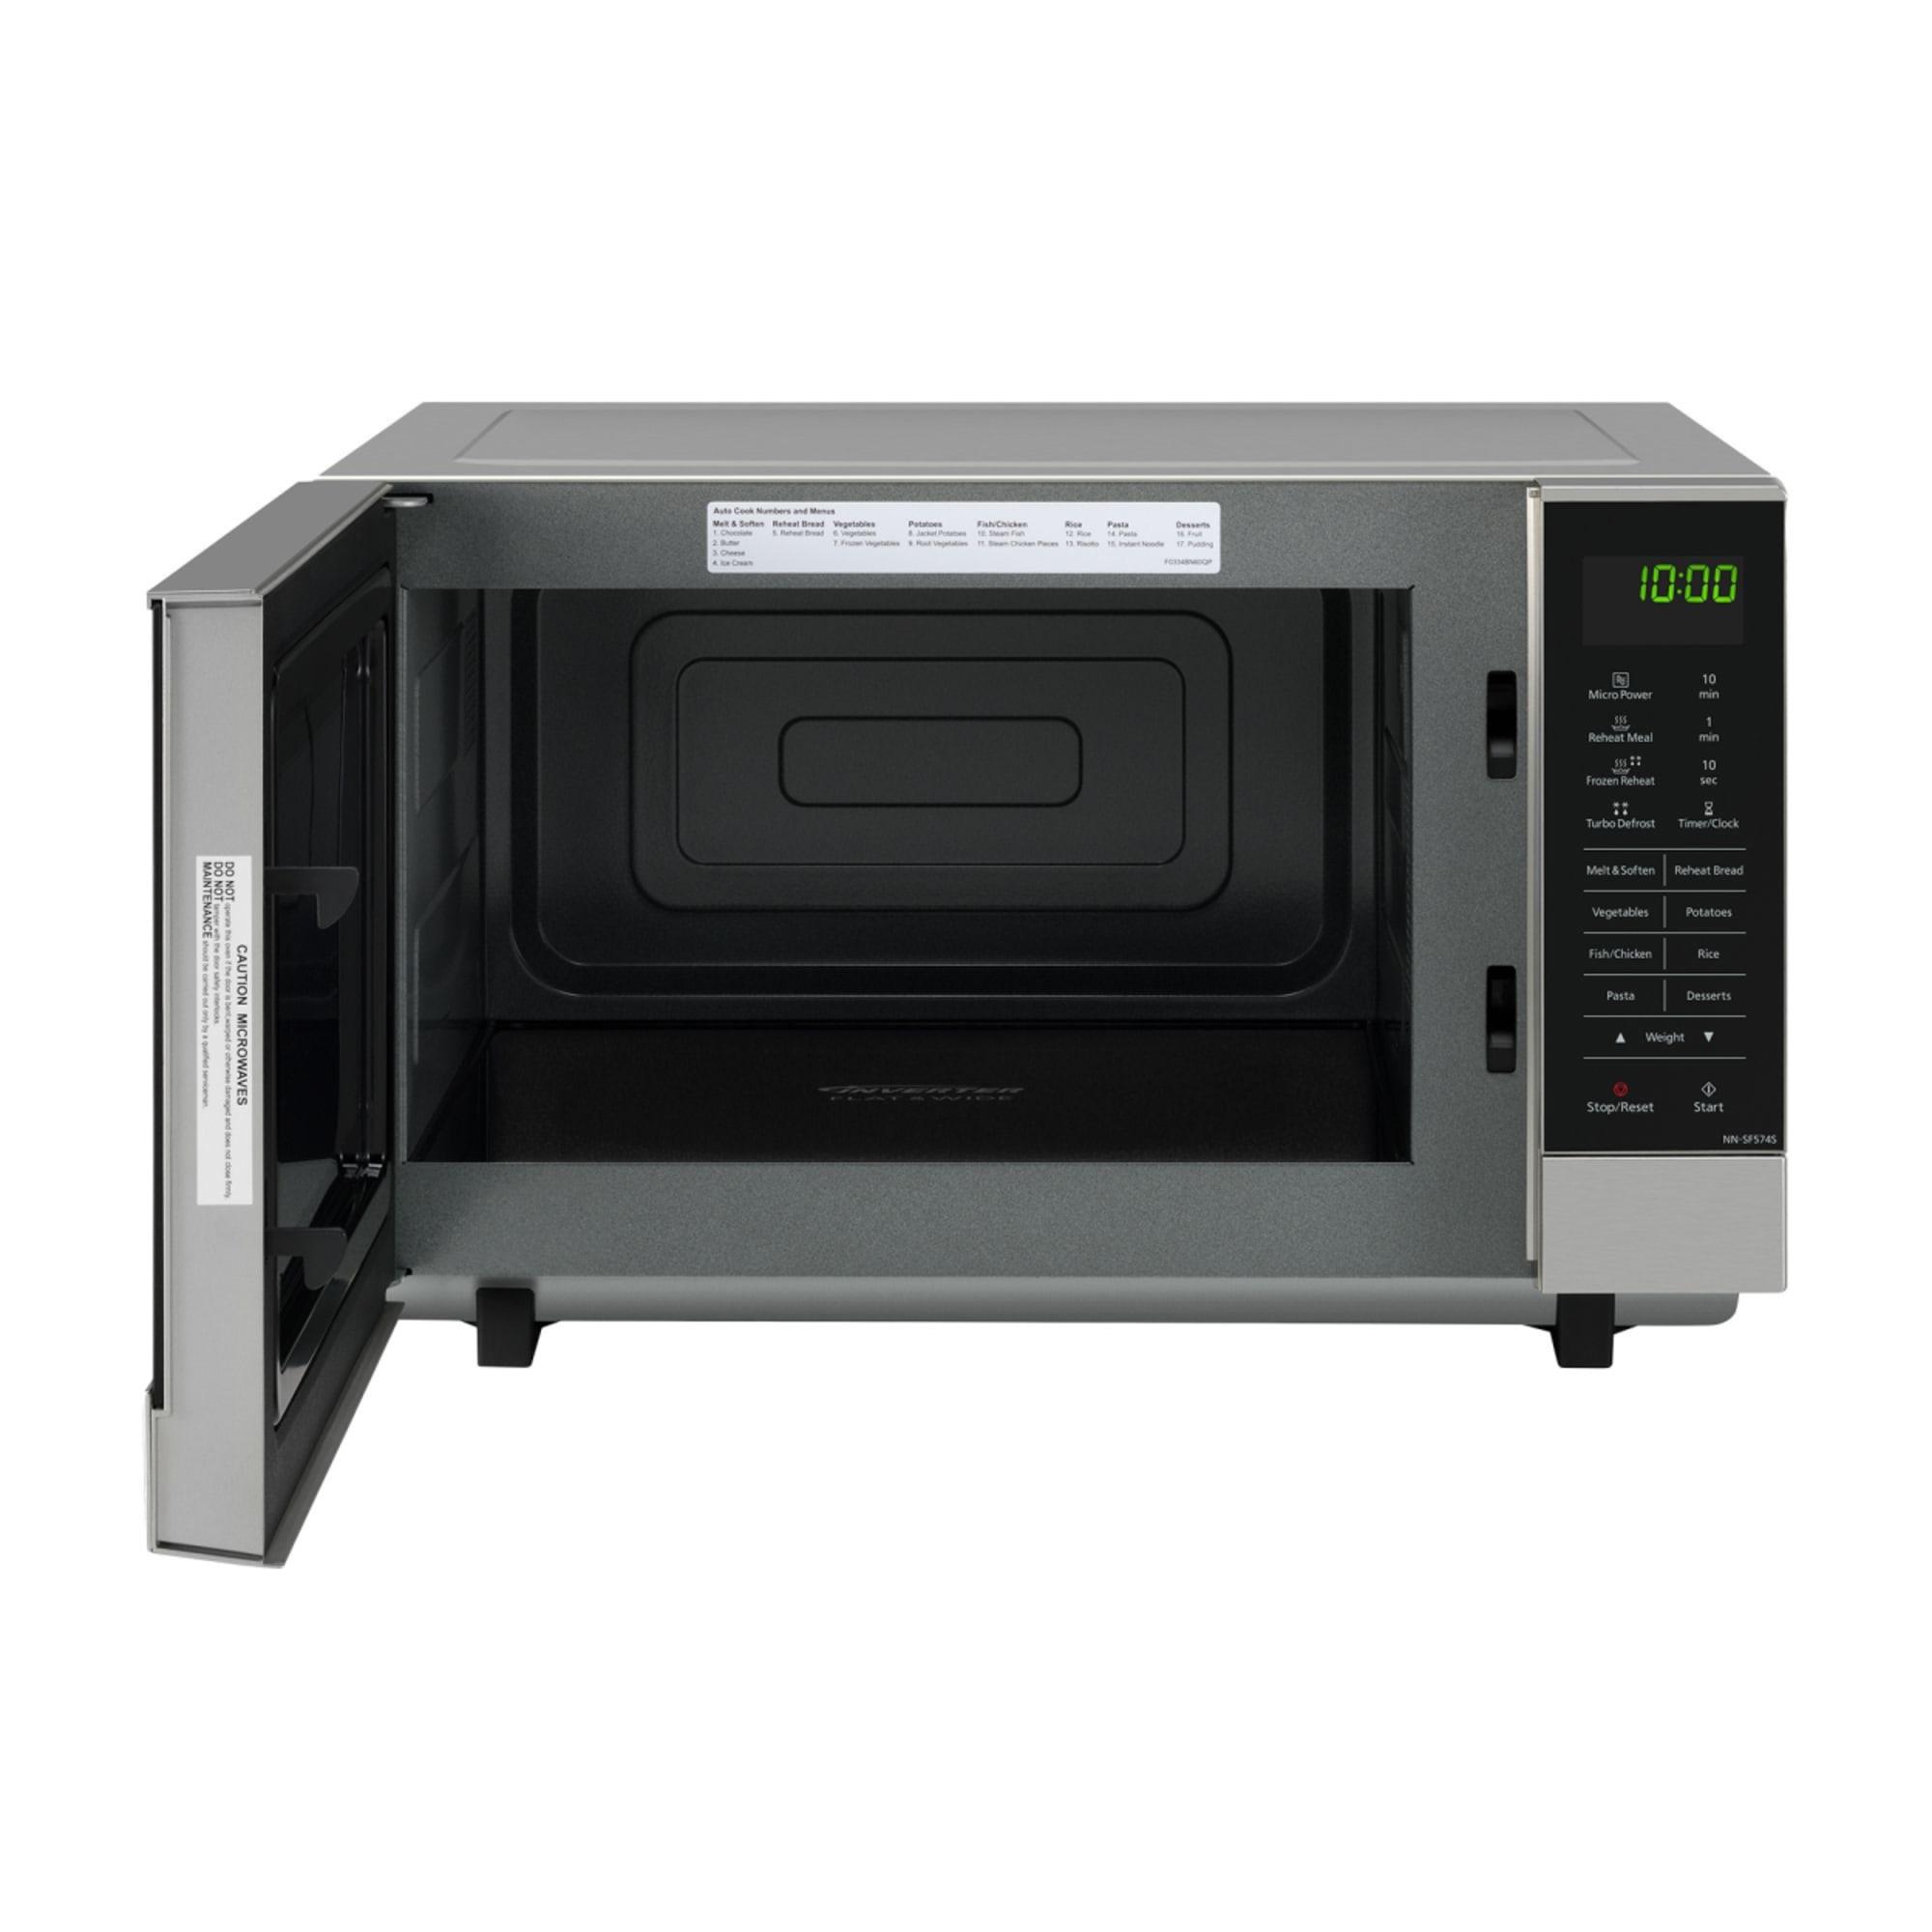 Panasonic Flatbed Microwave Oven 27L Stainless Steel Image 4